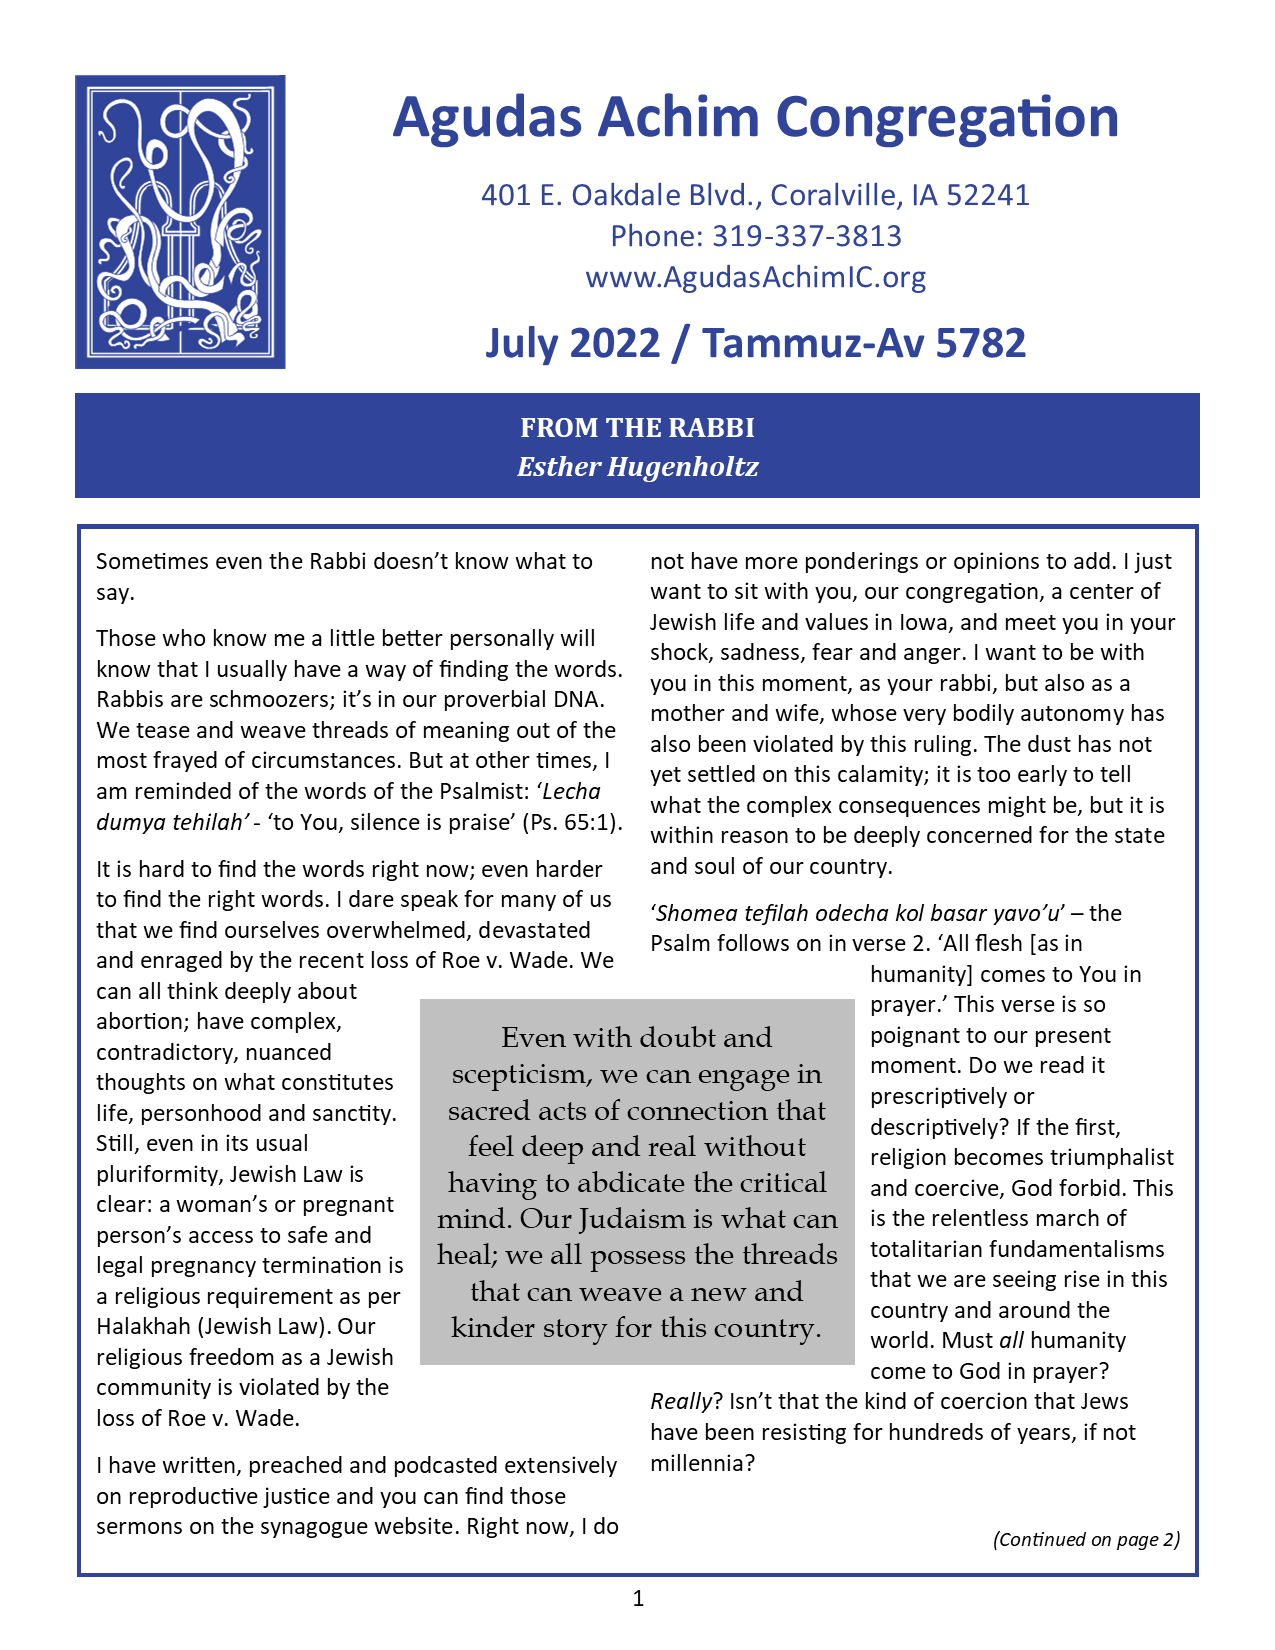 July 2022 Bulletin Cover